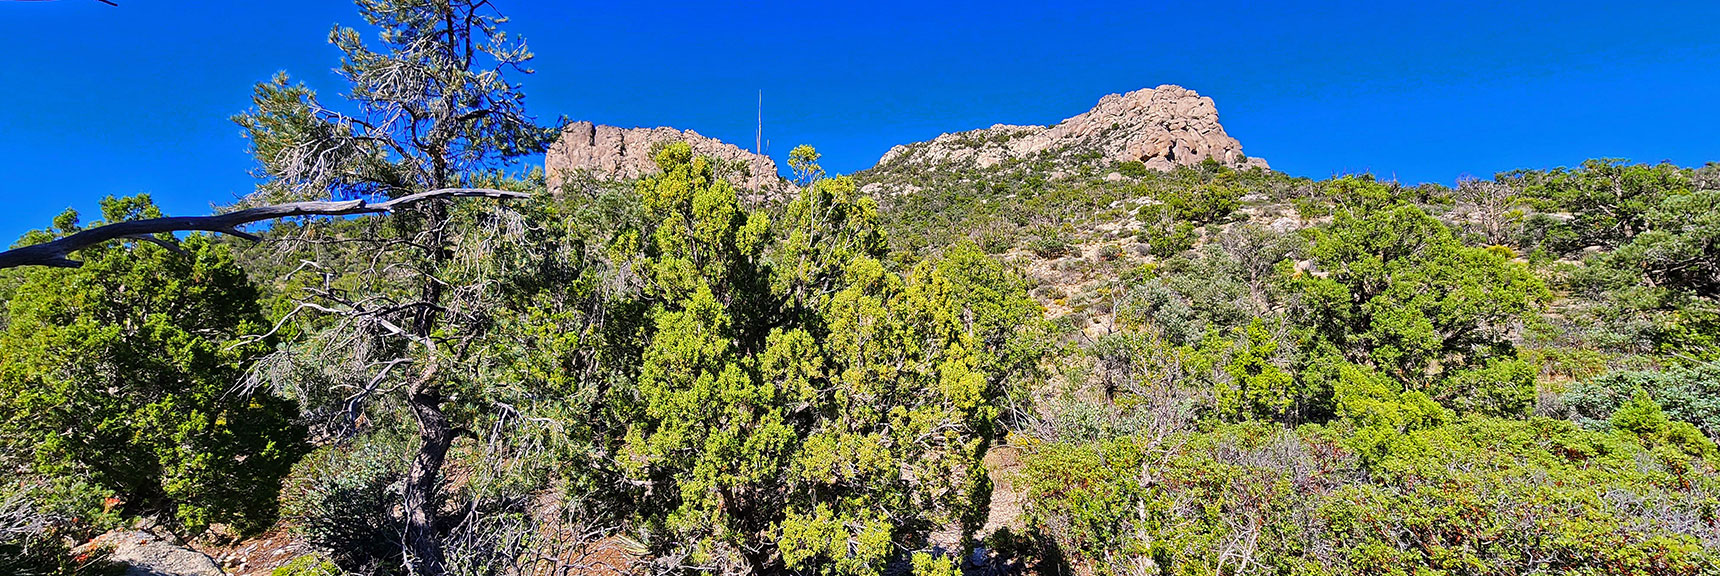 View Back Up To Rocky Ledges on Either Side of "Gully from Hell" | Mt Wilson to Juniper Peak | Rainbow Mountains Upper Crest Ridgeline | Rainbow Mountain Wilderness, Nevada